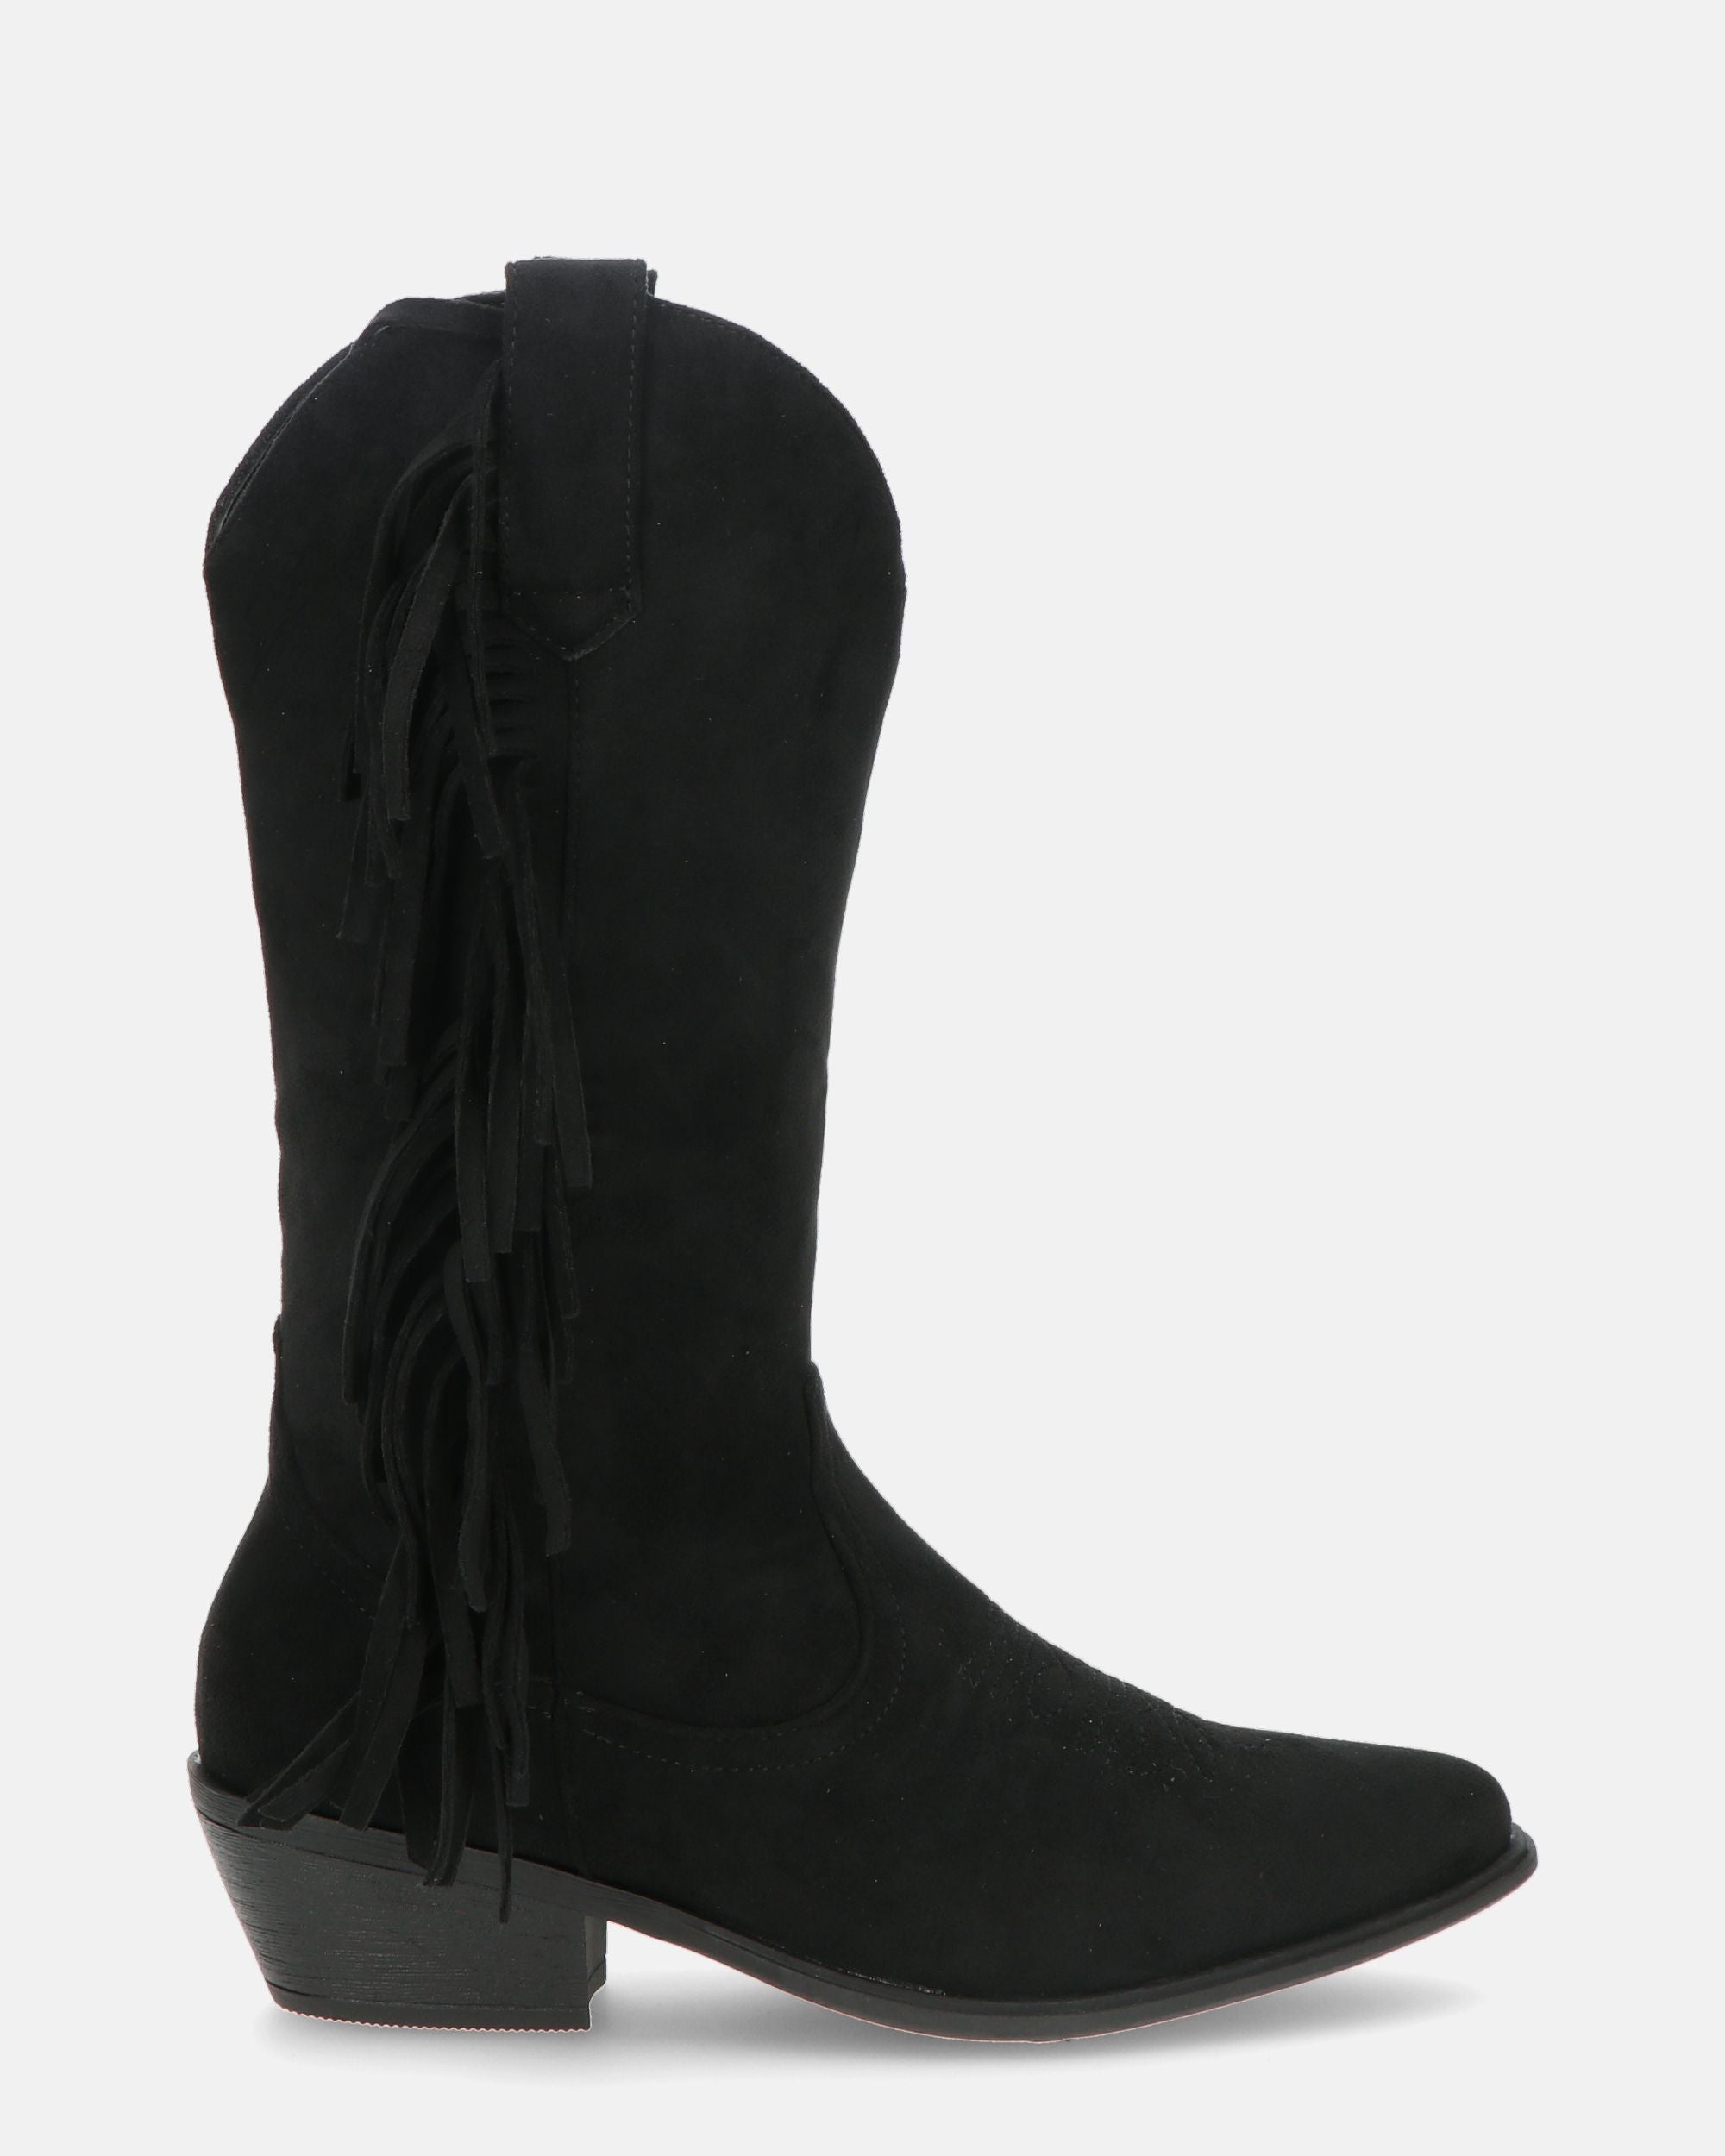 JADYN - black suede ankle boot with fringes